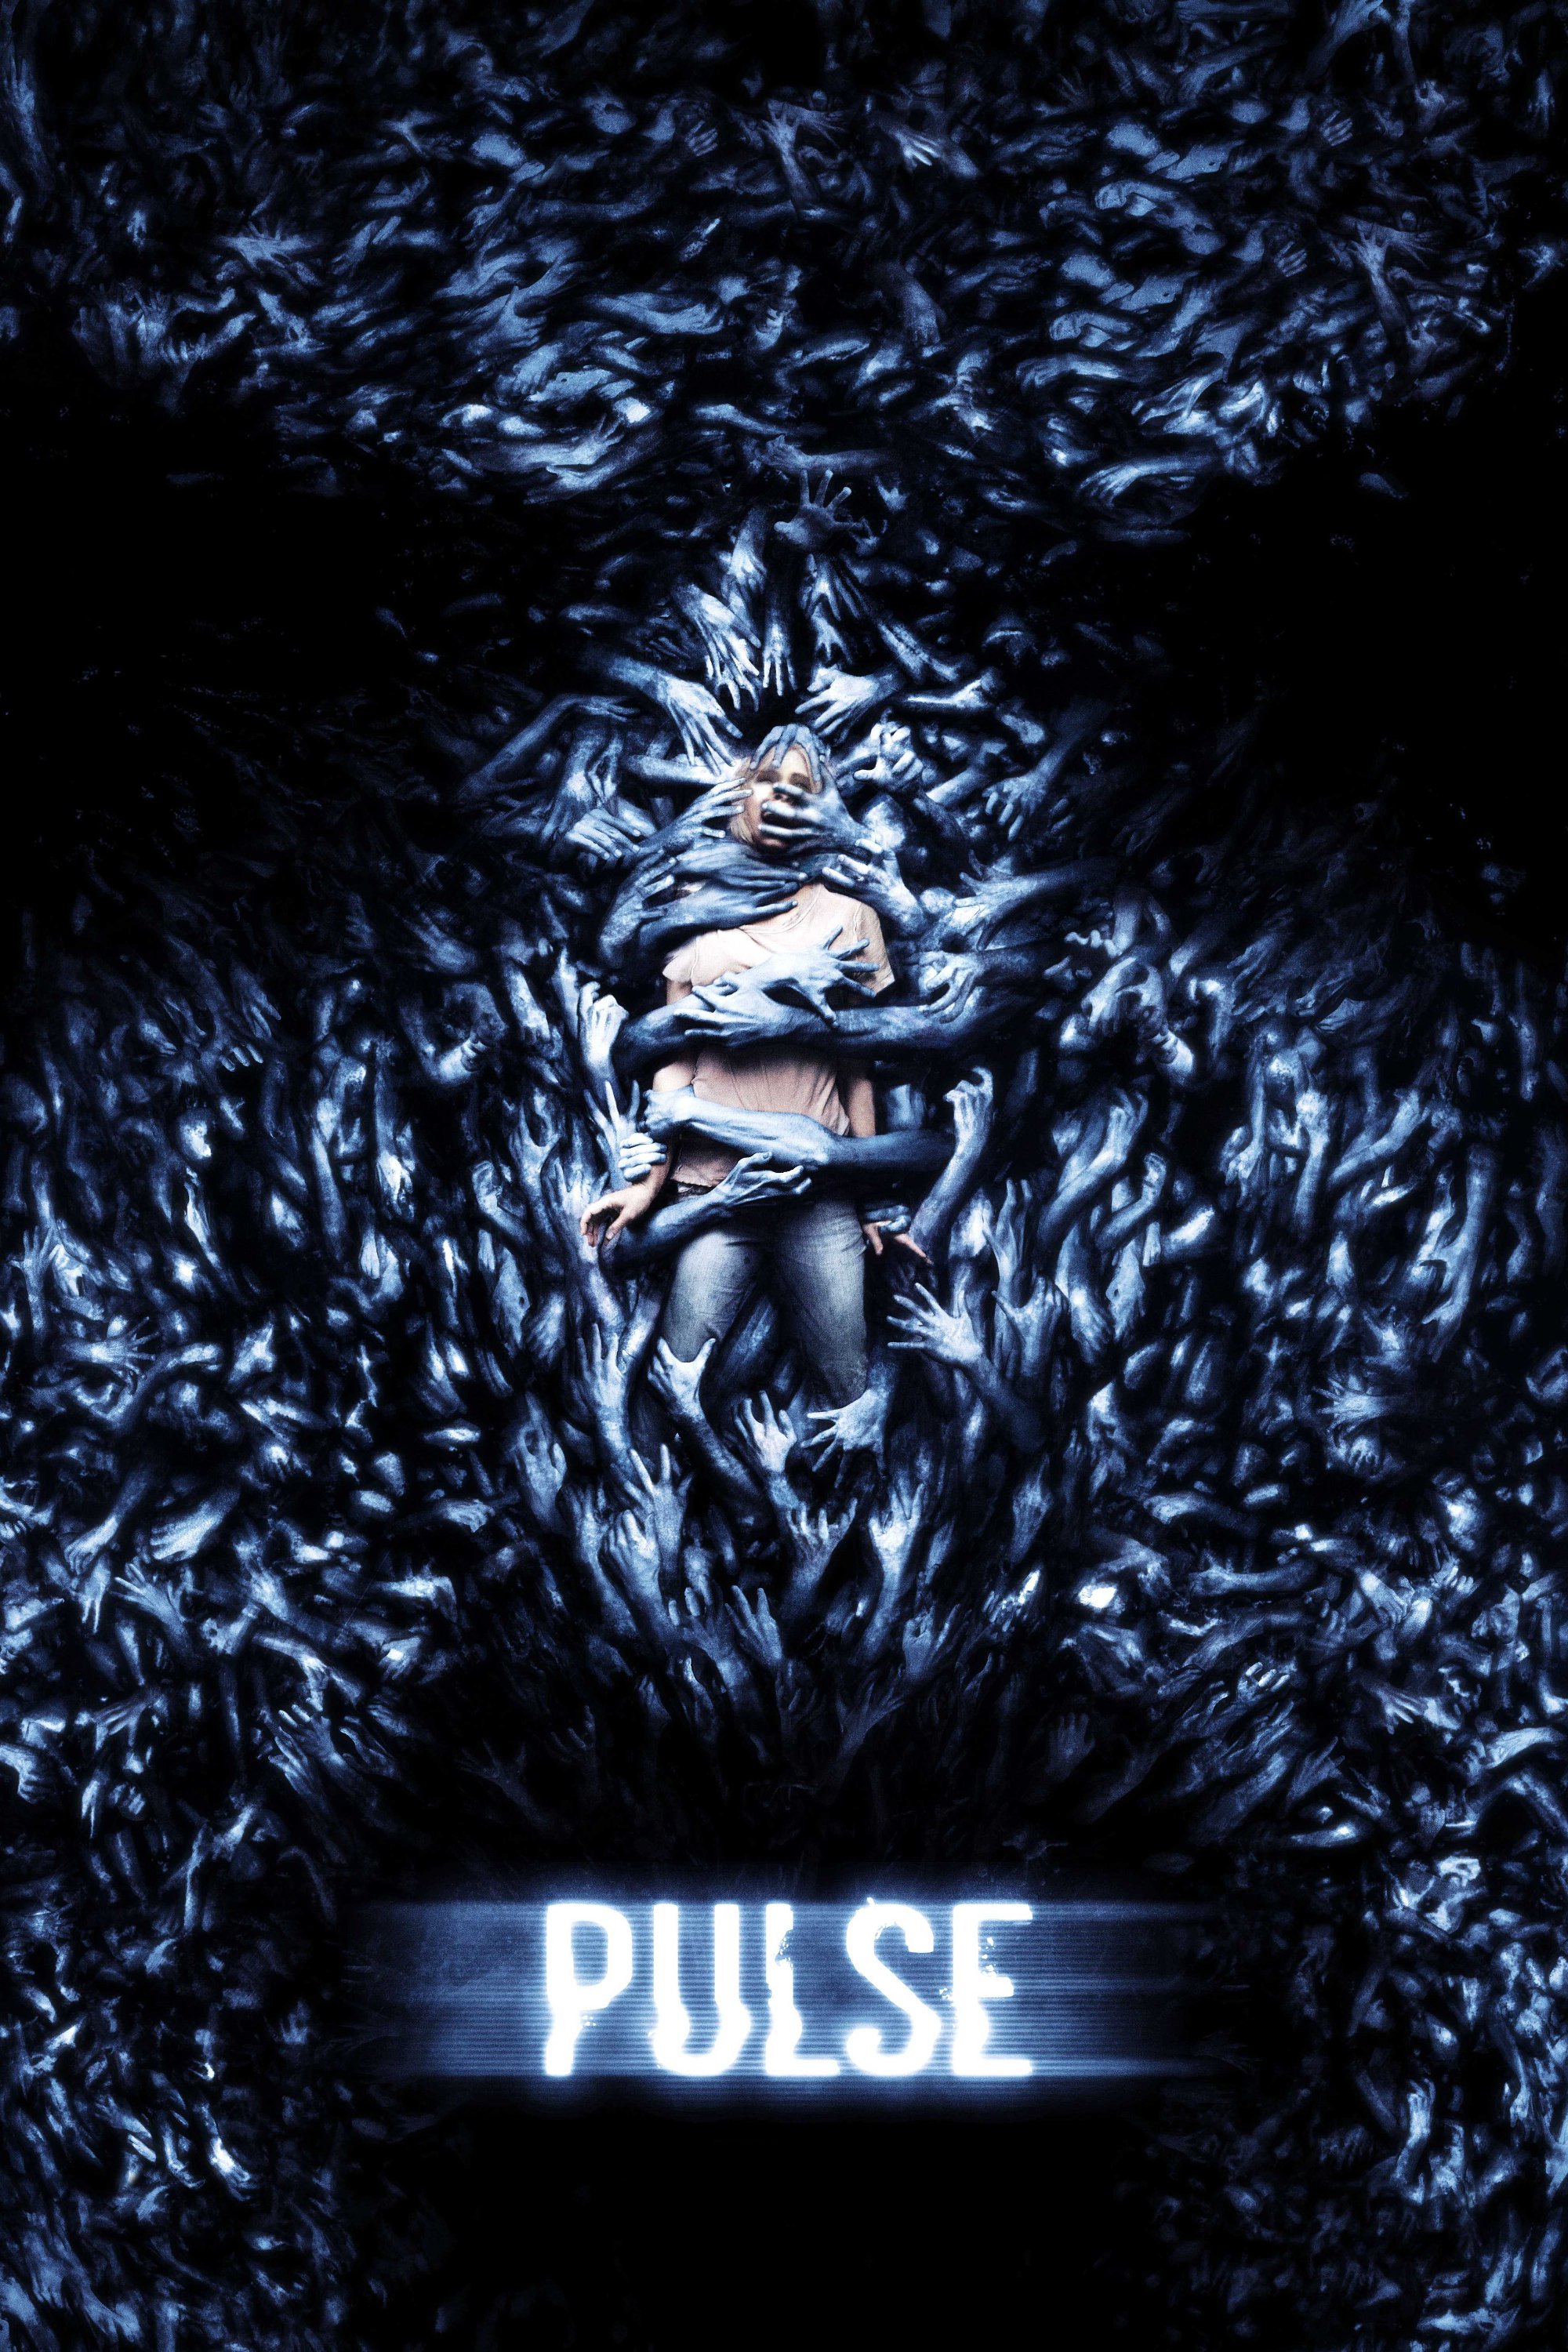 Poster for the movie "Pulse"